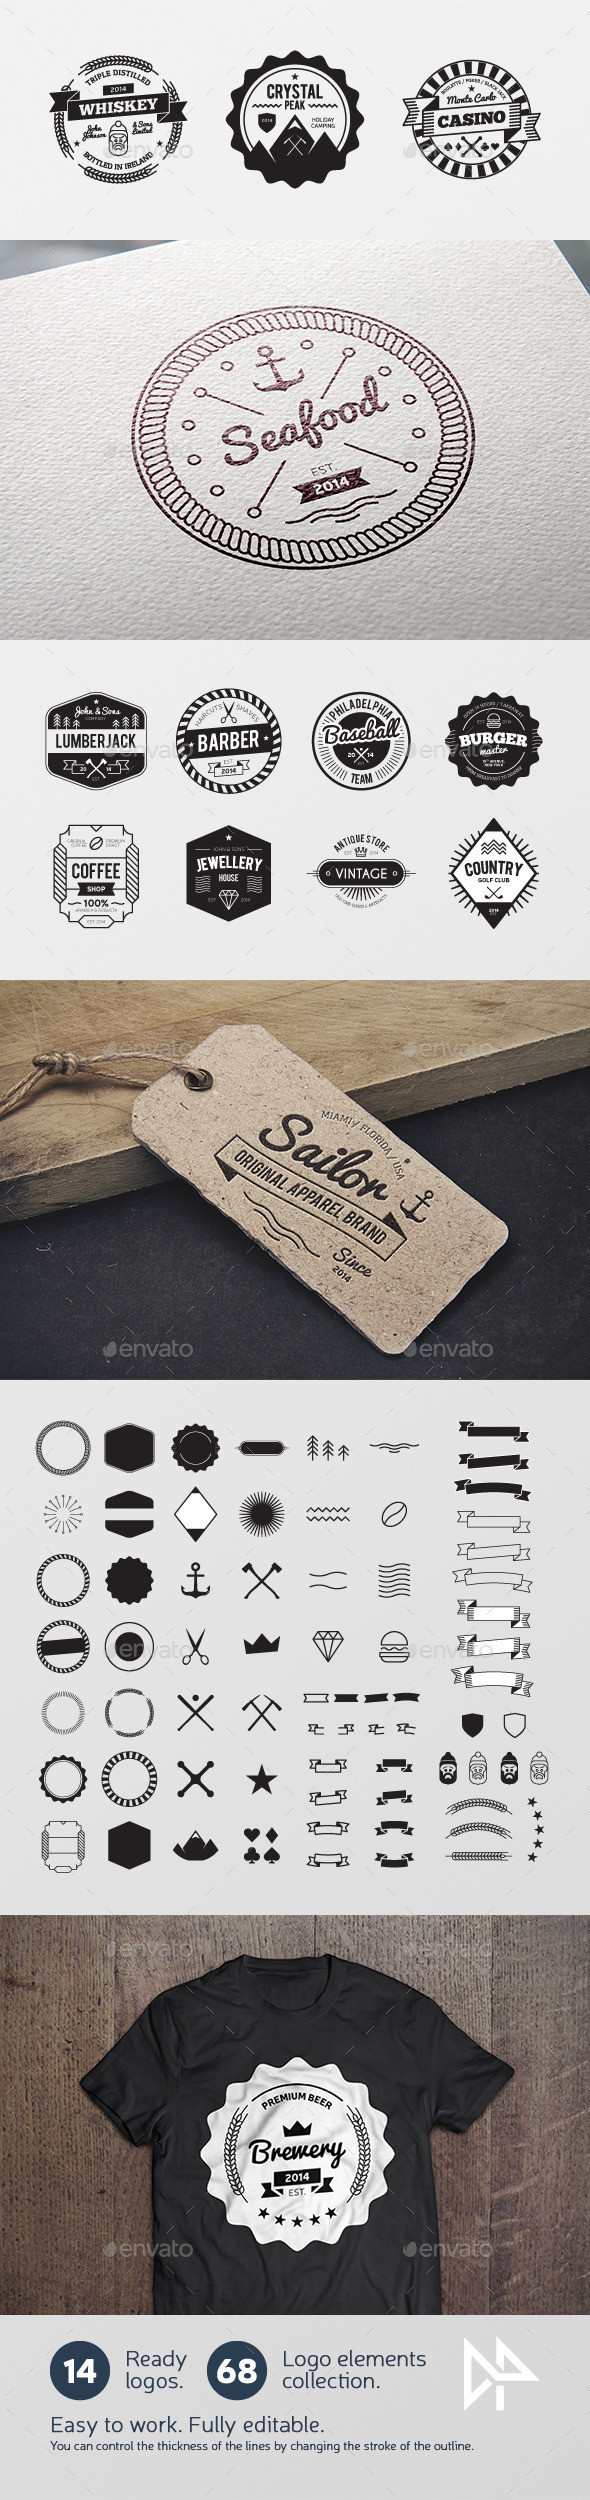 Badges toolkit preview  envato  590x1200px